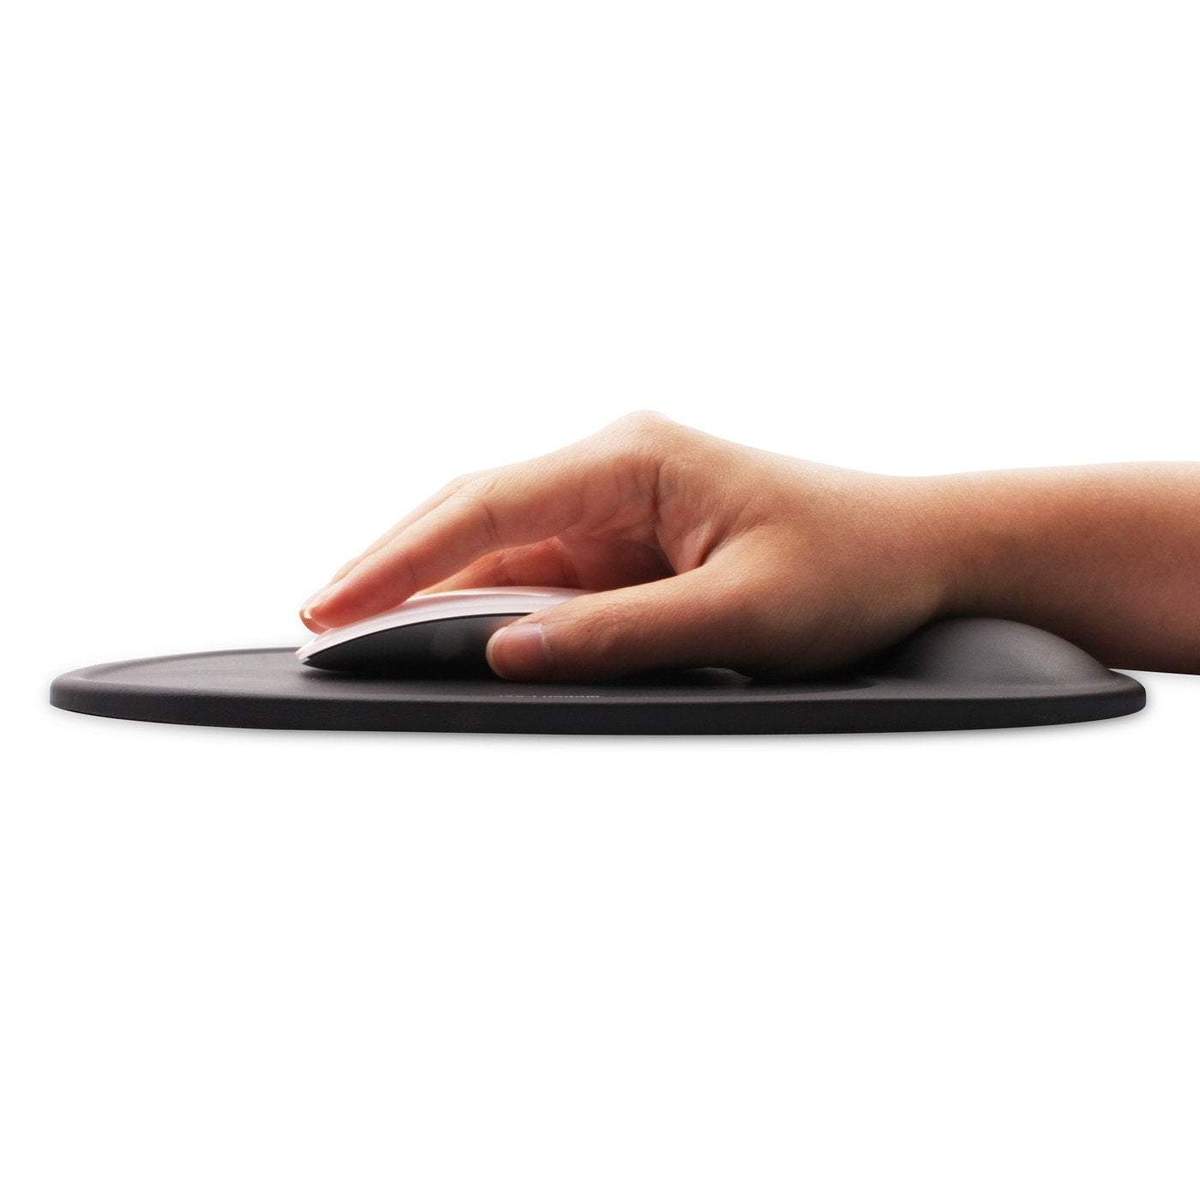 Jcpal Accessories Comforpad Ergonomic Mouse Pad Black &Lt;H1 Class=&Quot;Product_Name Title&Quot;&Gt;Comforpad Ergonomic Mouse Pad&Lt;/H1&Gt; With An Integrated Foam Wrist Rest, The Comfortpad Mouse Pad Offers Comfortable Support For Your Wrist To Prevent Fatigue And Strain During Extended Computer Sessions. The Large Mousing Area Has A Smooth Surface For Quick And Comfortable Movement And Is Finely Textured For Accurate Optical And Laser Mouse Tracking. The Comforpad Also Features A Non-Slip Backing Which Effectively Prevents Shifting And Slipping During Use. &Lt;Strong&Gt;Dimensions Width:&Lt;/Strong&Gt; 180Mm &Lt;Strong&Gt;Length:&Lt;/Strong&Gt; 260Mm &Lt;Strong&Gt;Thickness:&Lt;/Strong&Gt; Wrist Pad: 20Mm, Mouse Area: 7Mm Comforpad Ergonomic Mouse Pad Jcpal - Jcp6057 Comforpad Ergonomic Mouse Pad Jcpal - Jcp6057